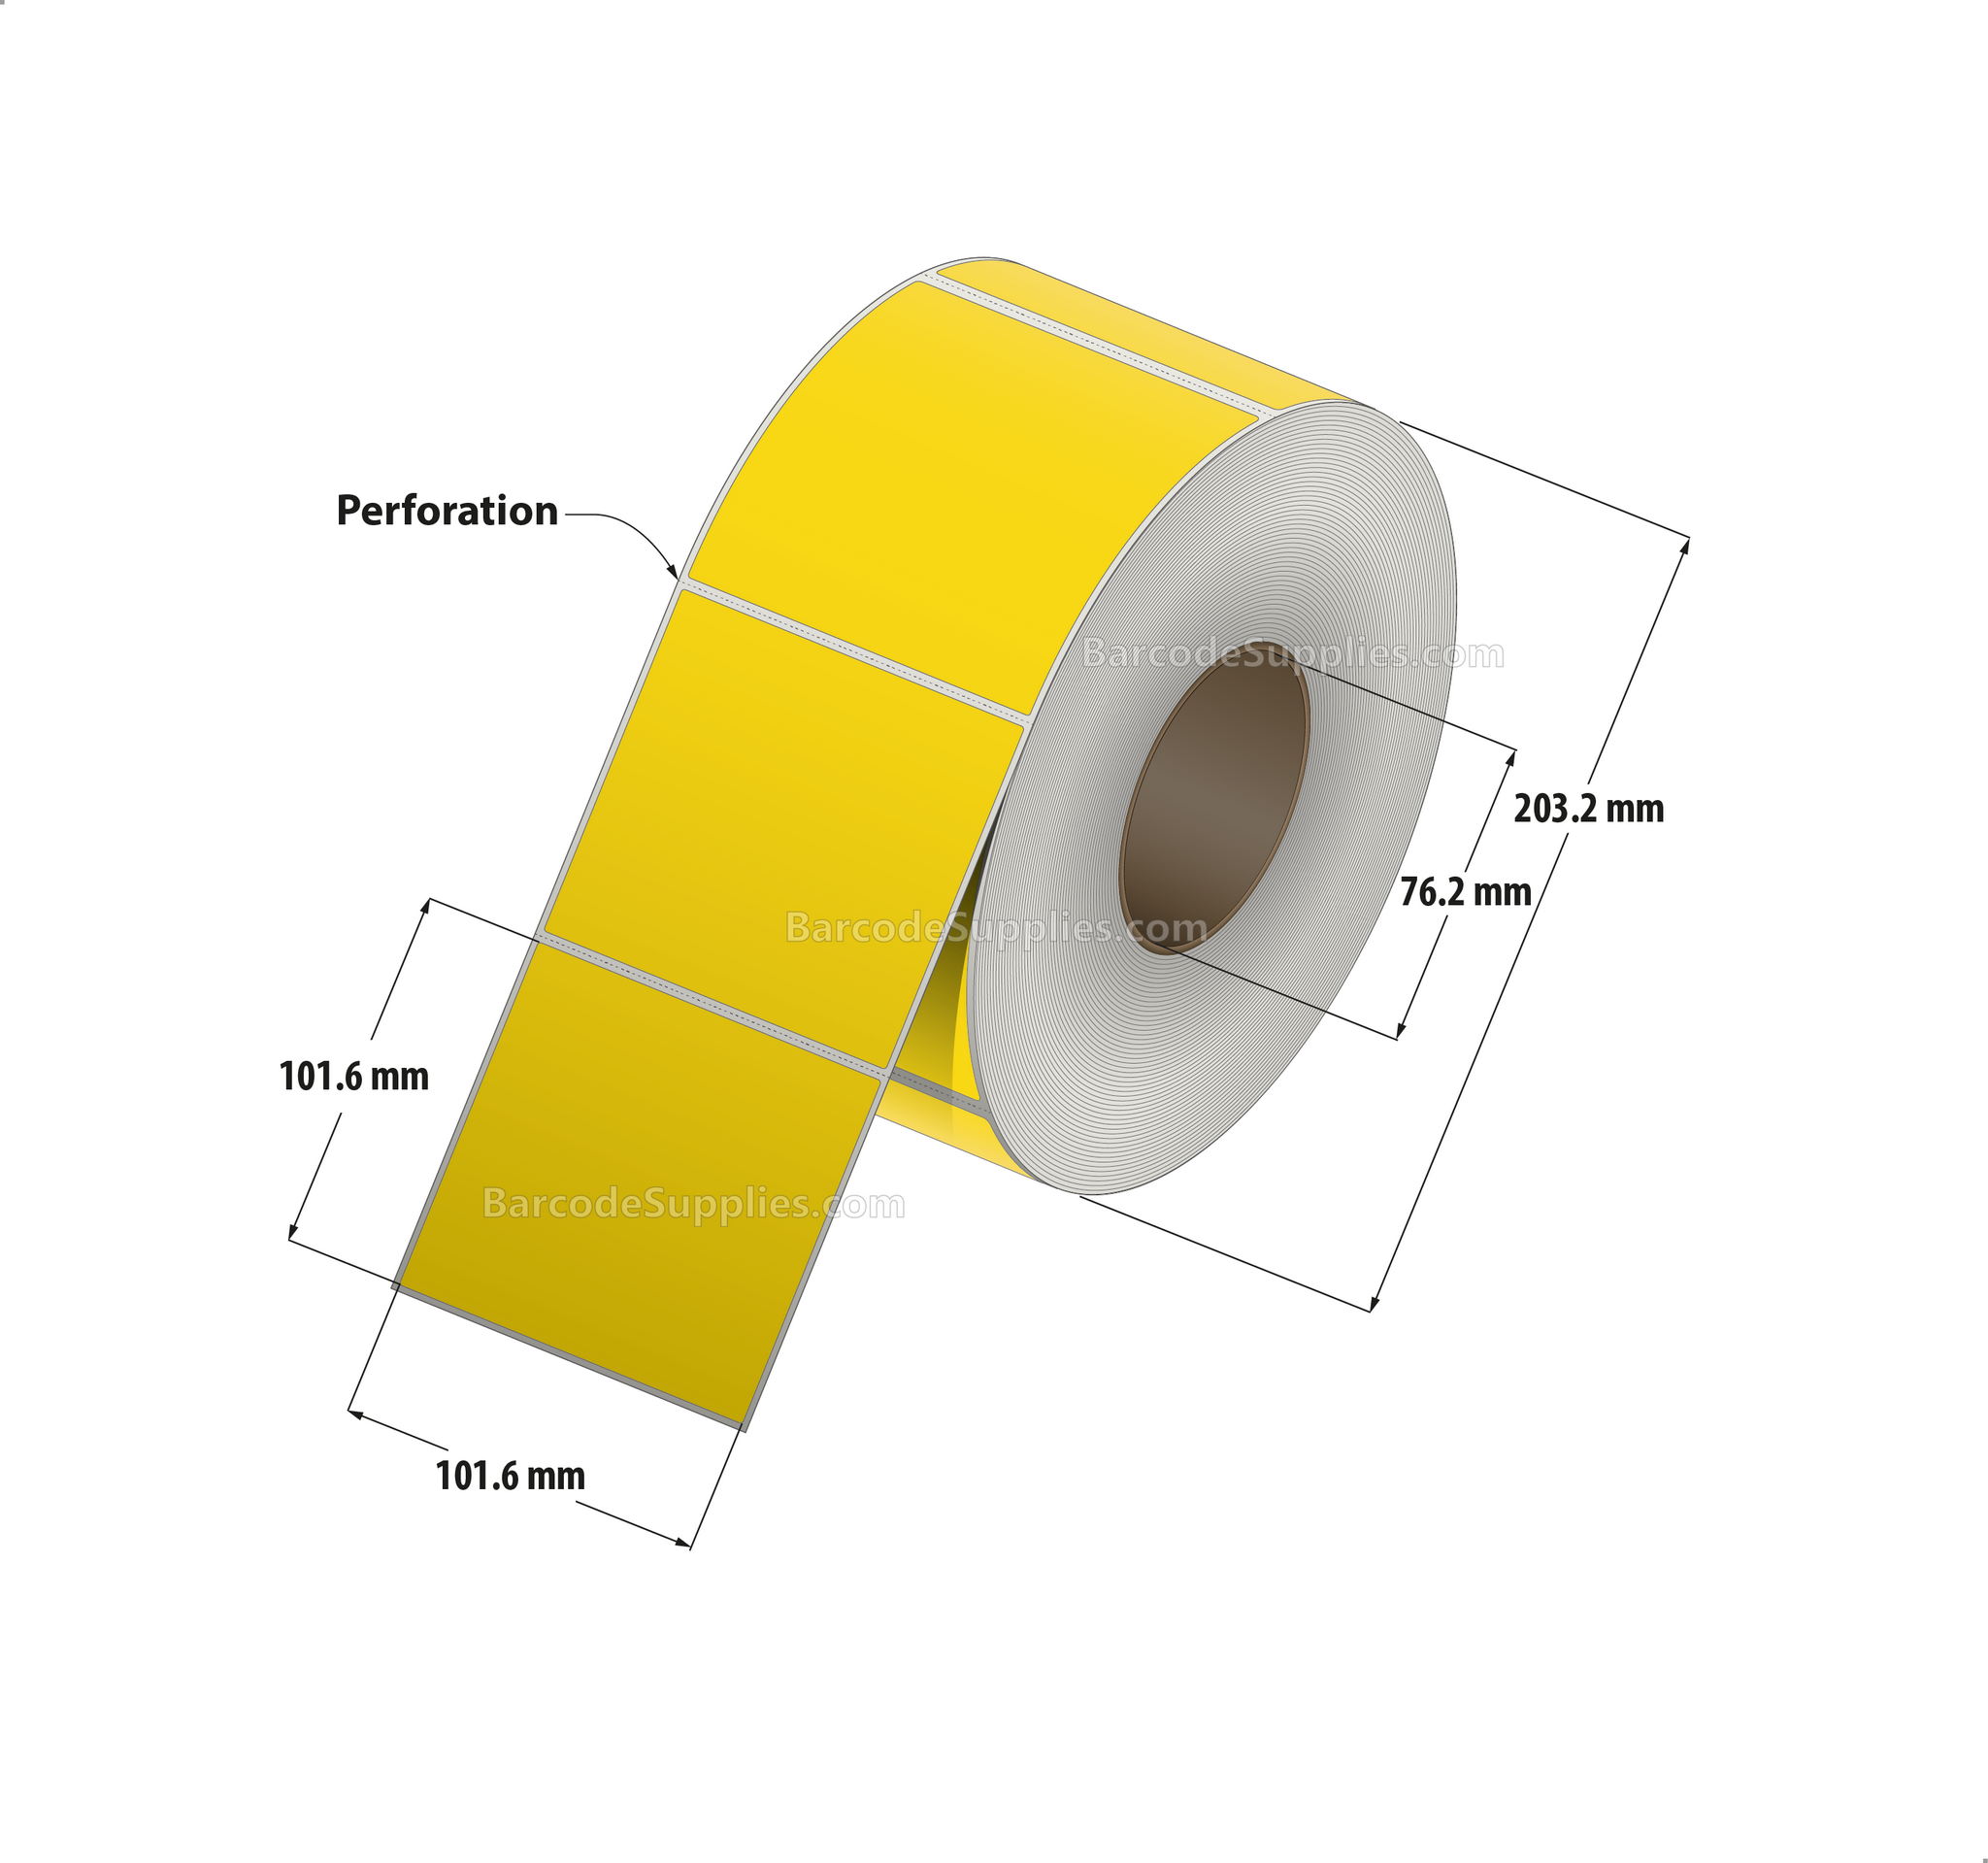 4 x 4 Thermal Transfer Pantone Yellow Labels With Permanent Adhesive - Perforated - 1500 Labels Per Roll - Carton Of 4 Rolls - 6000 Labels Total - MPN: RFC-4-4-1500-YL